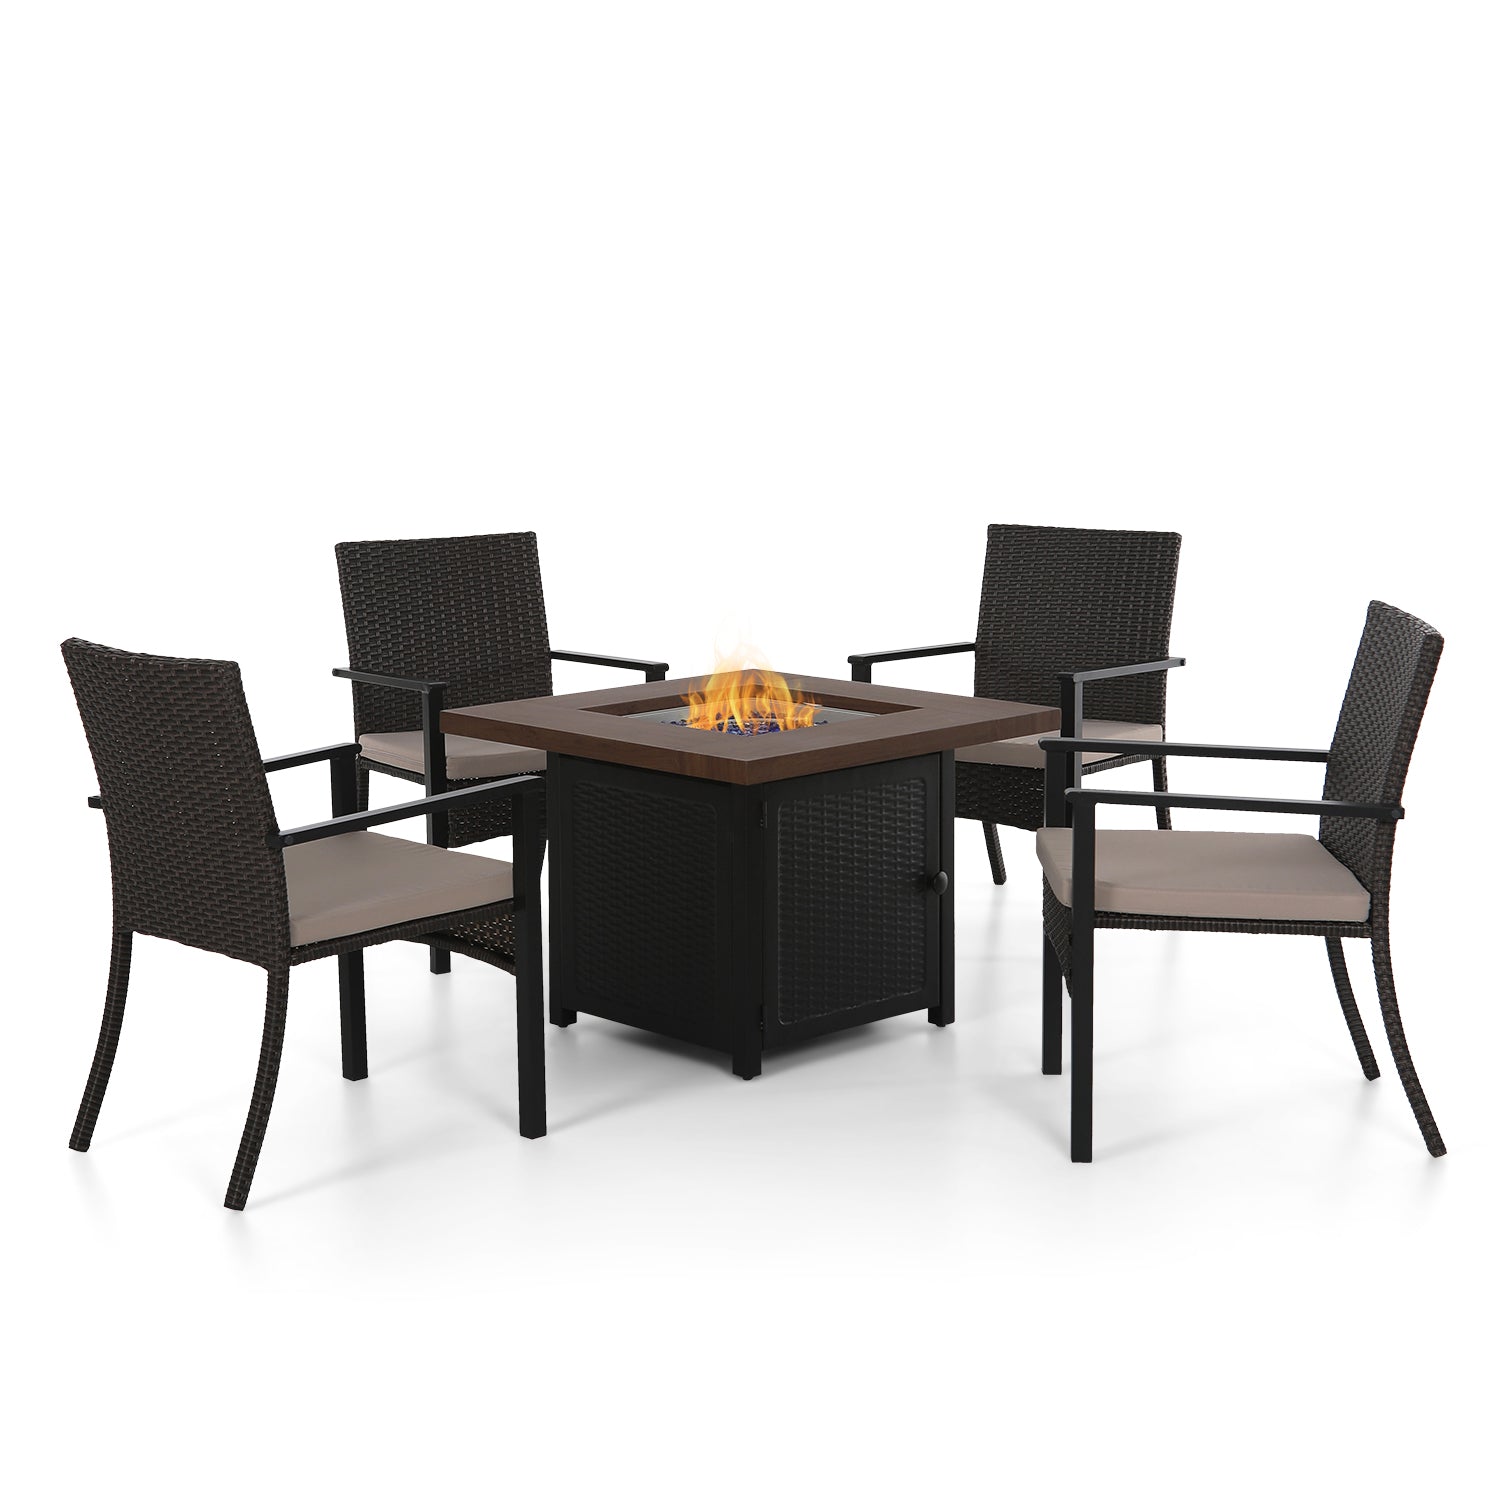 Sophia & William 5-Piece Wood-look 50,000 BTU Gas Fire Pit Table & Rattan Cushion Chairs Patio Dining Set